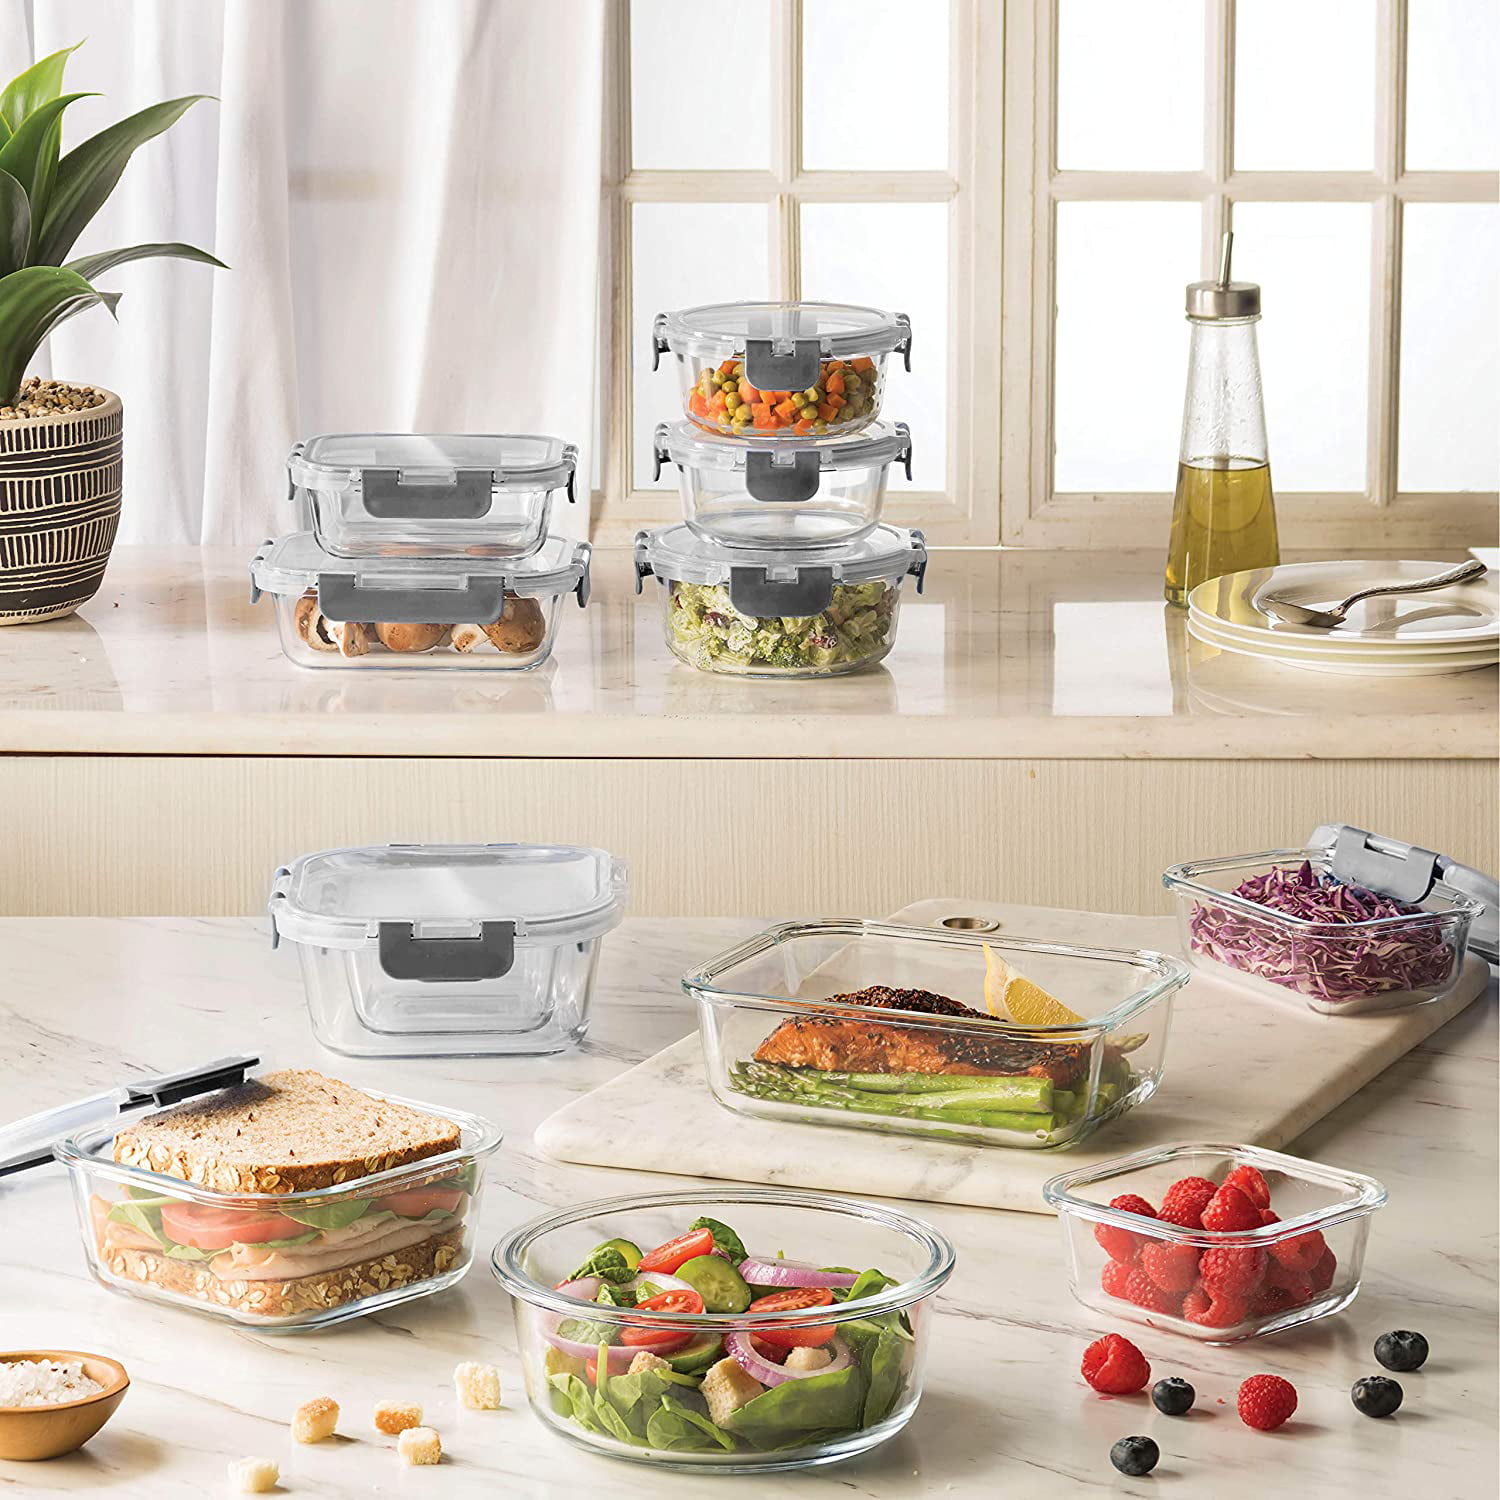 FineDine 12-Piece Superior Glass Food Storage Containers Set, 32oz Capacity  - Newly Innovated Hinged Locking lids - 100% Leakproof Glass Meal-Prep